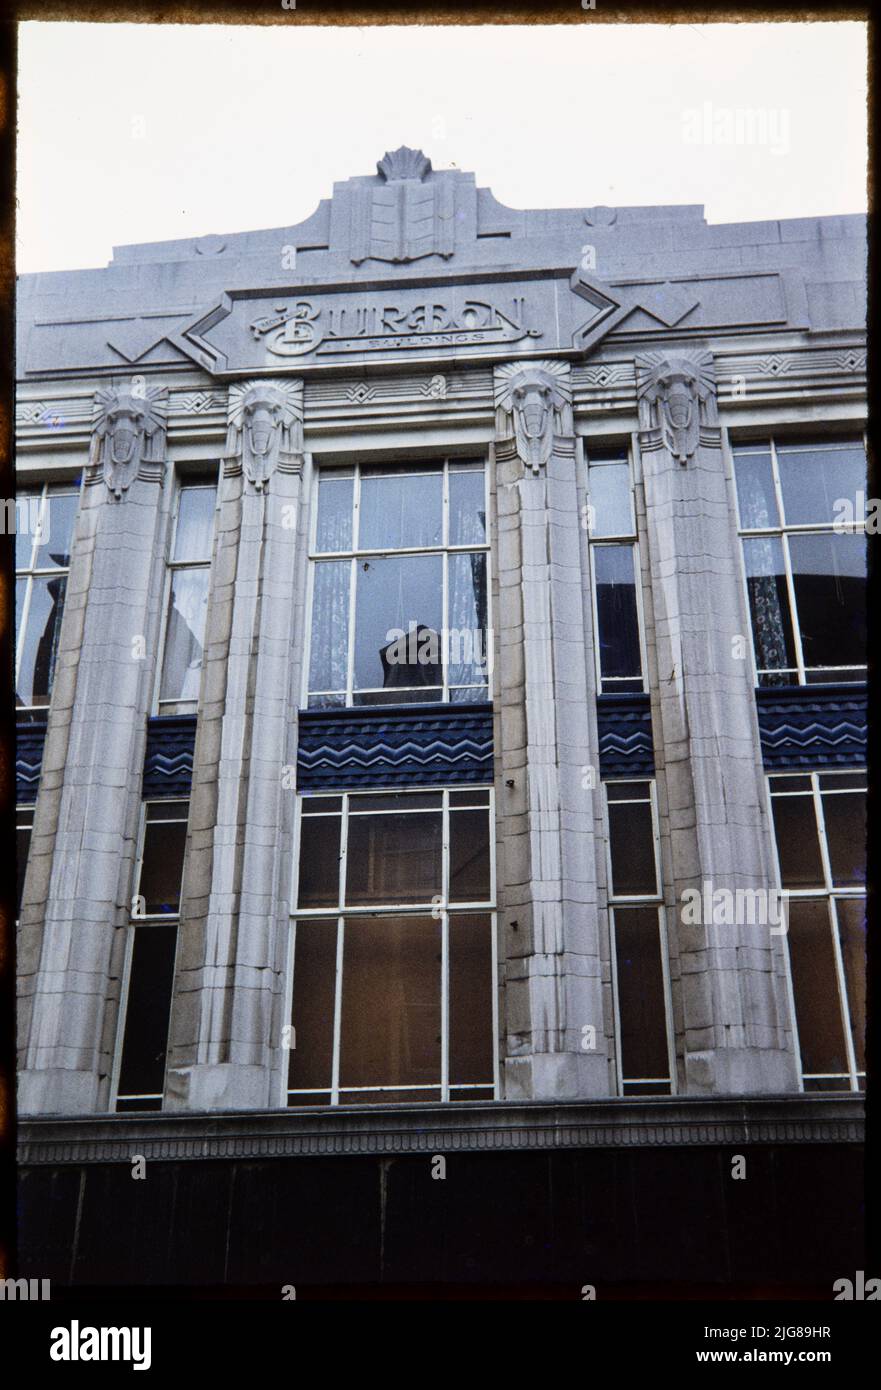 Burton, 22-24 Old Market, Halifax, Calderdale, 1970s-1980s. Looking up at the centre of the west, Princess Street elevation of the Burton store at 22-24 Old Market, showing the central relief carving bearing the company's logo. Foundation stones were laid at the Old Market store by Arnold James Burton, Raymond Montague Burton and Stanley Howard Burton in 1932. The premises were later occupied by businesses including McDonald's. Stylised elephant heads, shown crowning pilasters between the first and second floor windows, are one a number of motifs used in the design of Burton stores. They featu Stock Photo